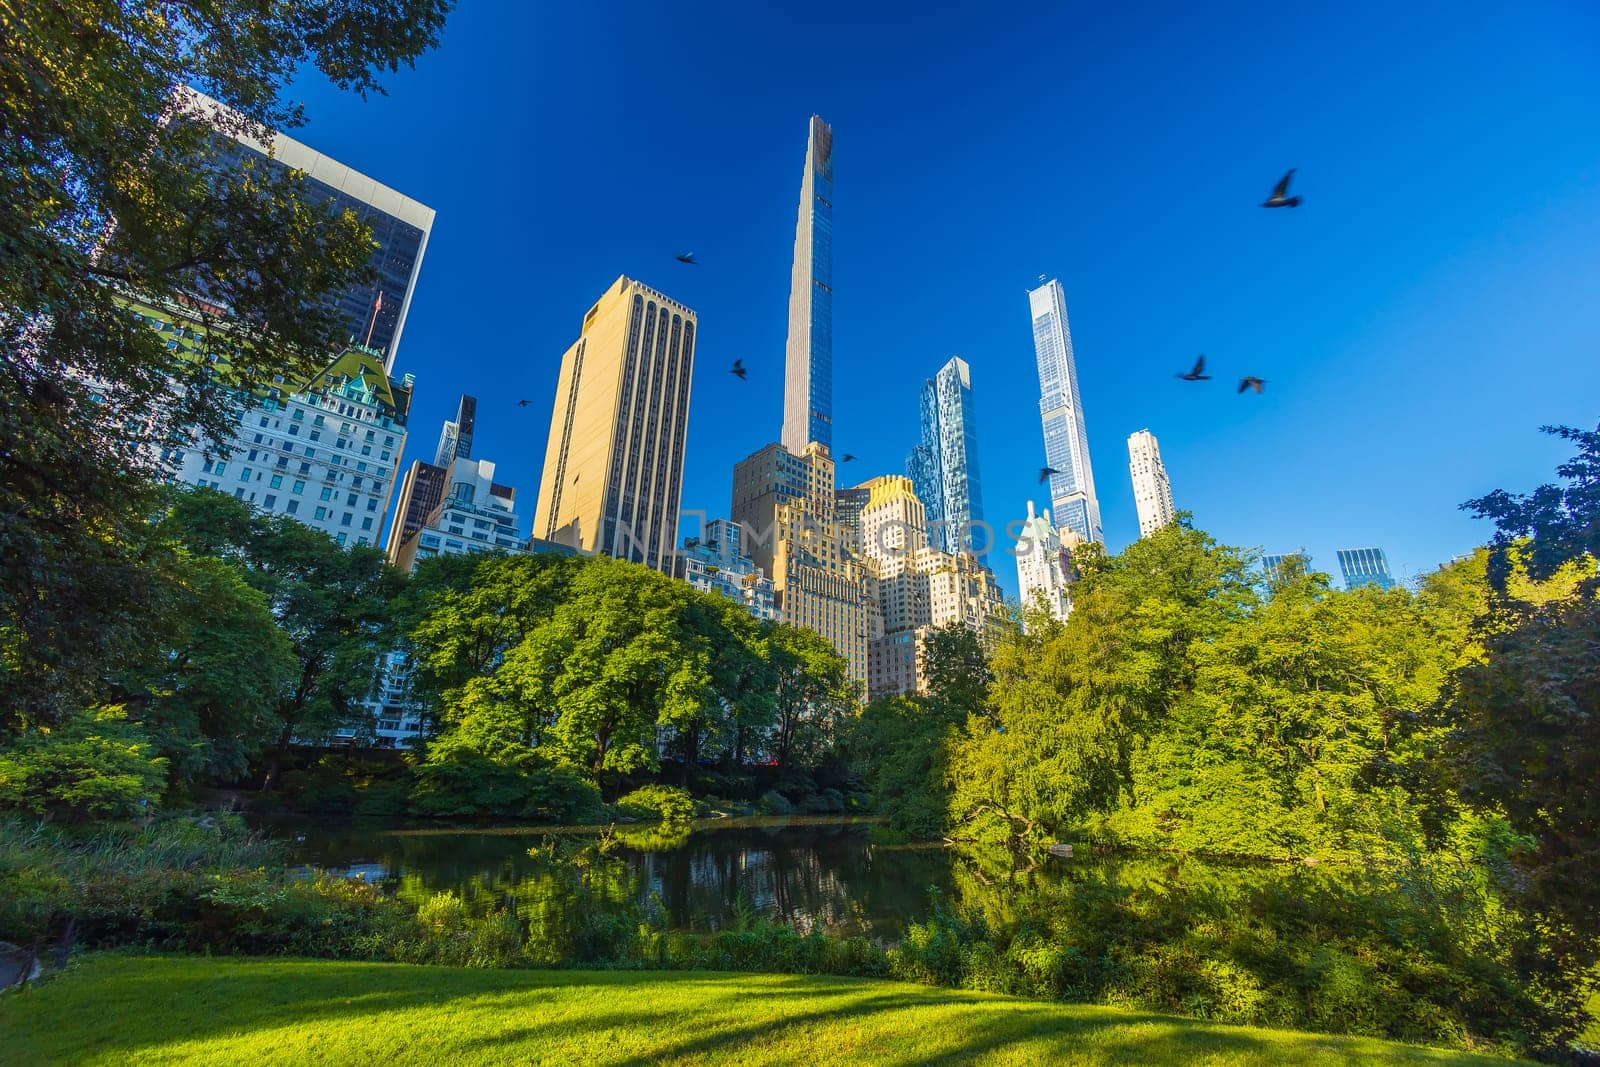 Central Park in New York City USA by f11photo